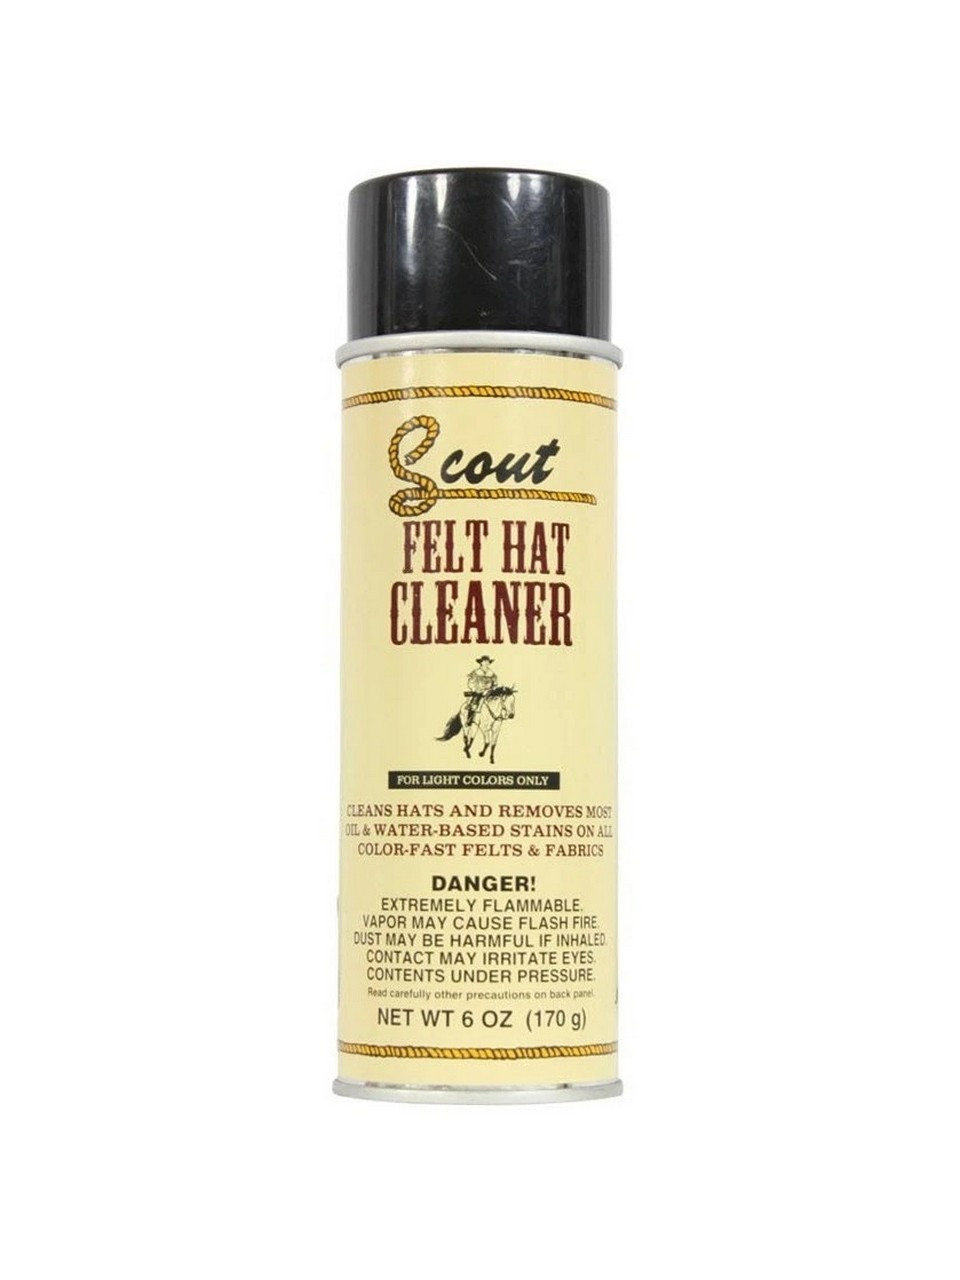 M&F Scout Felt Hat Cleaner for Dark Colors - 01047